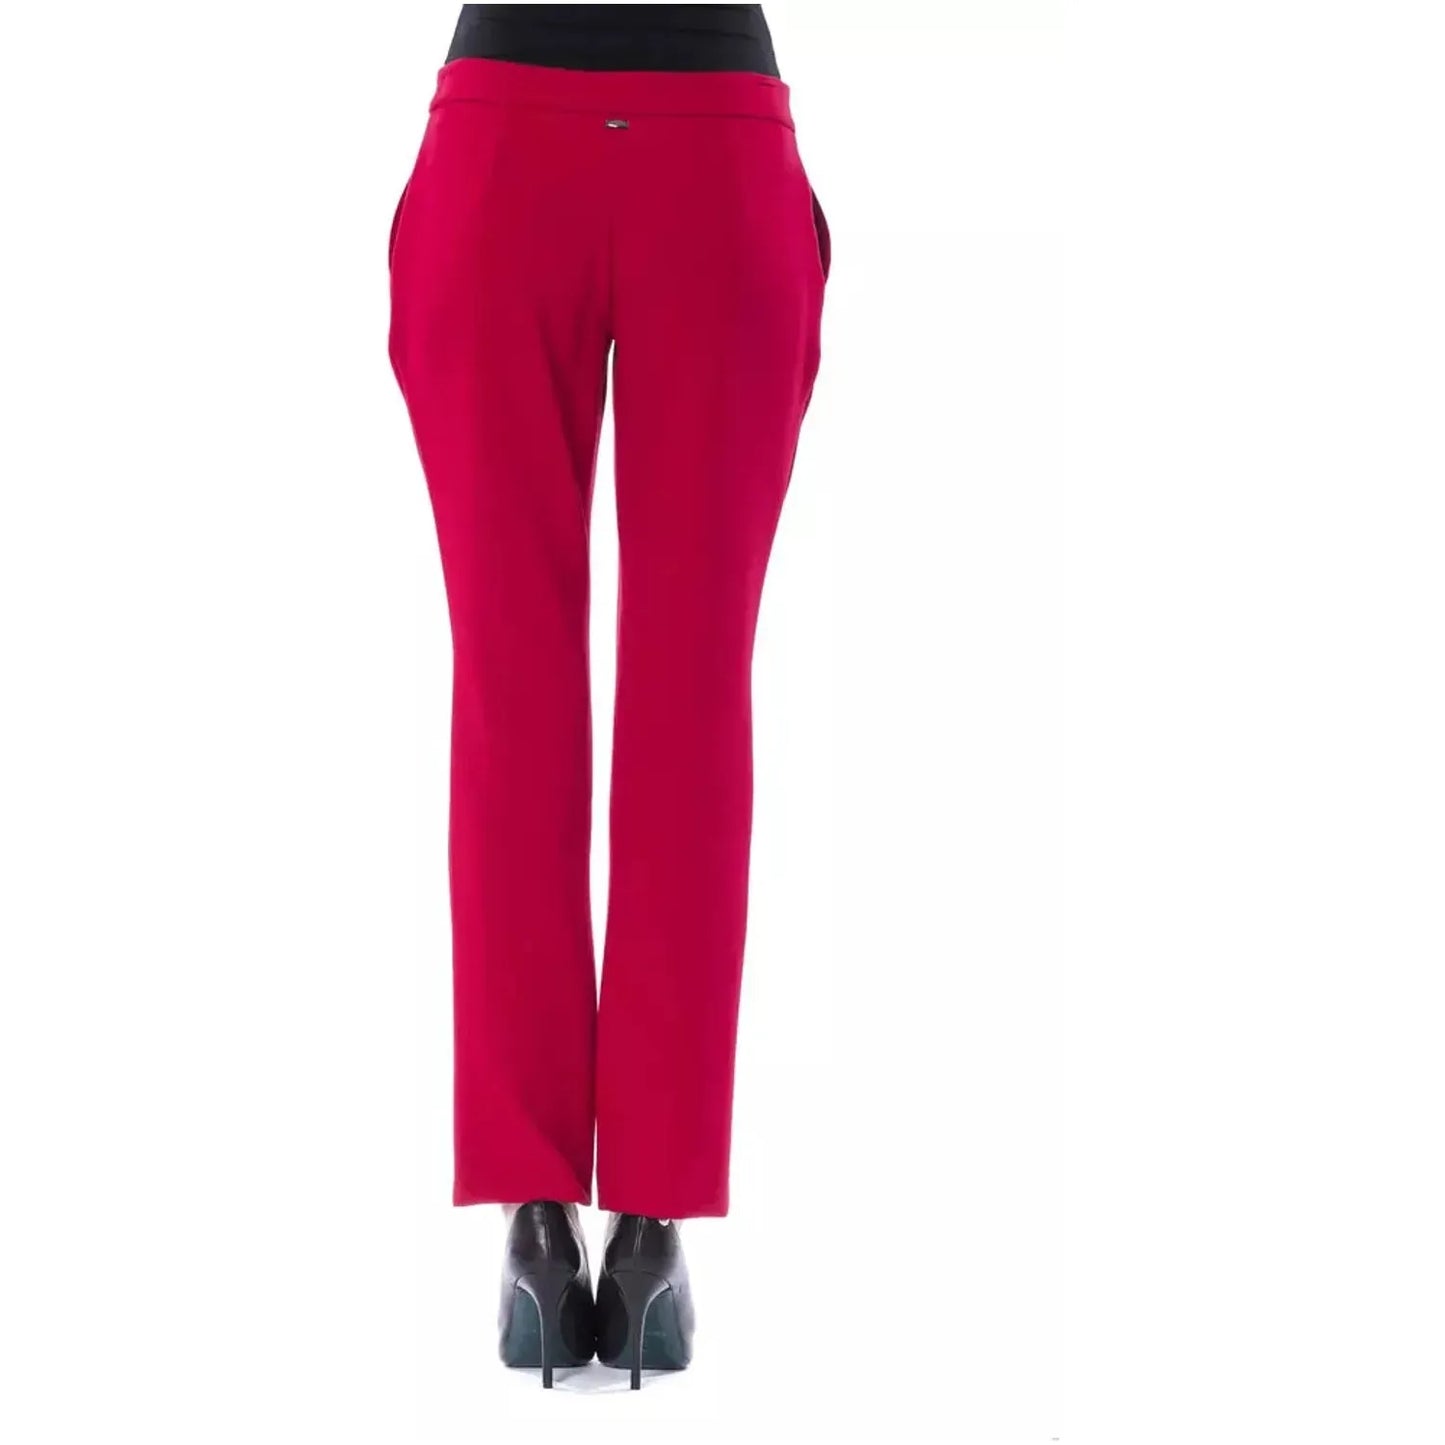 BYBLOS Chic Fuchsia Slim Fit Trousers ciliegia-jeans-pant stock_product_image_17648_1219454580-15-b5d59841-064.webp